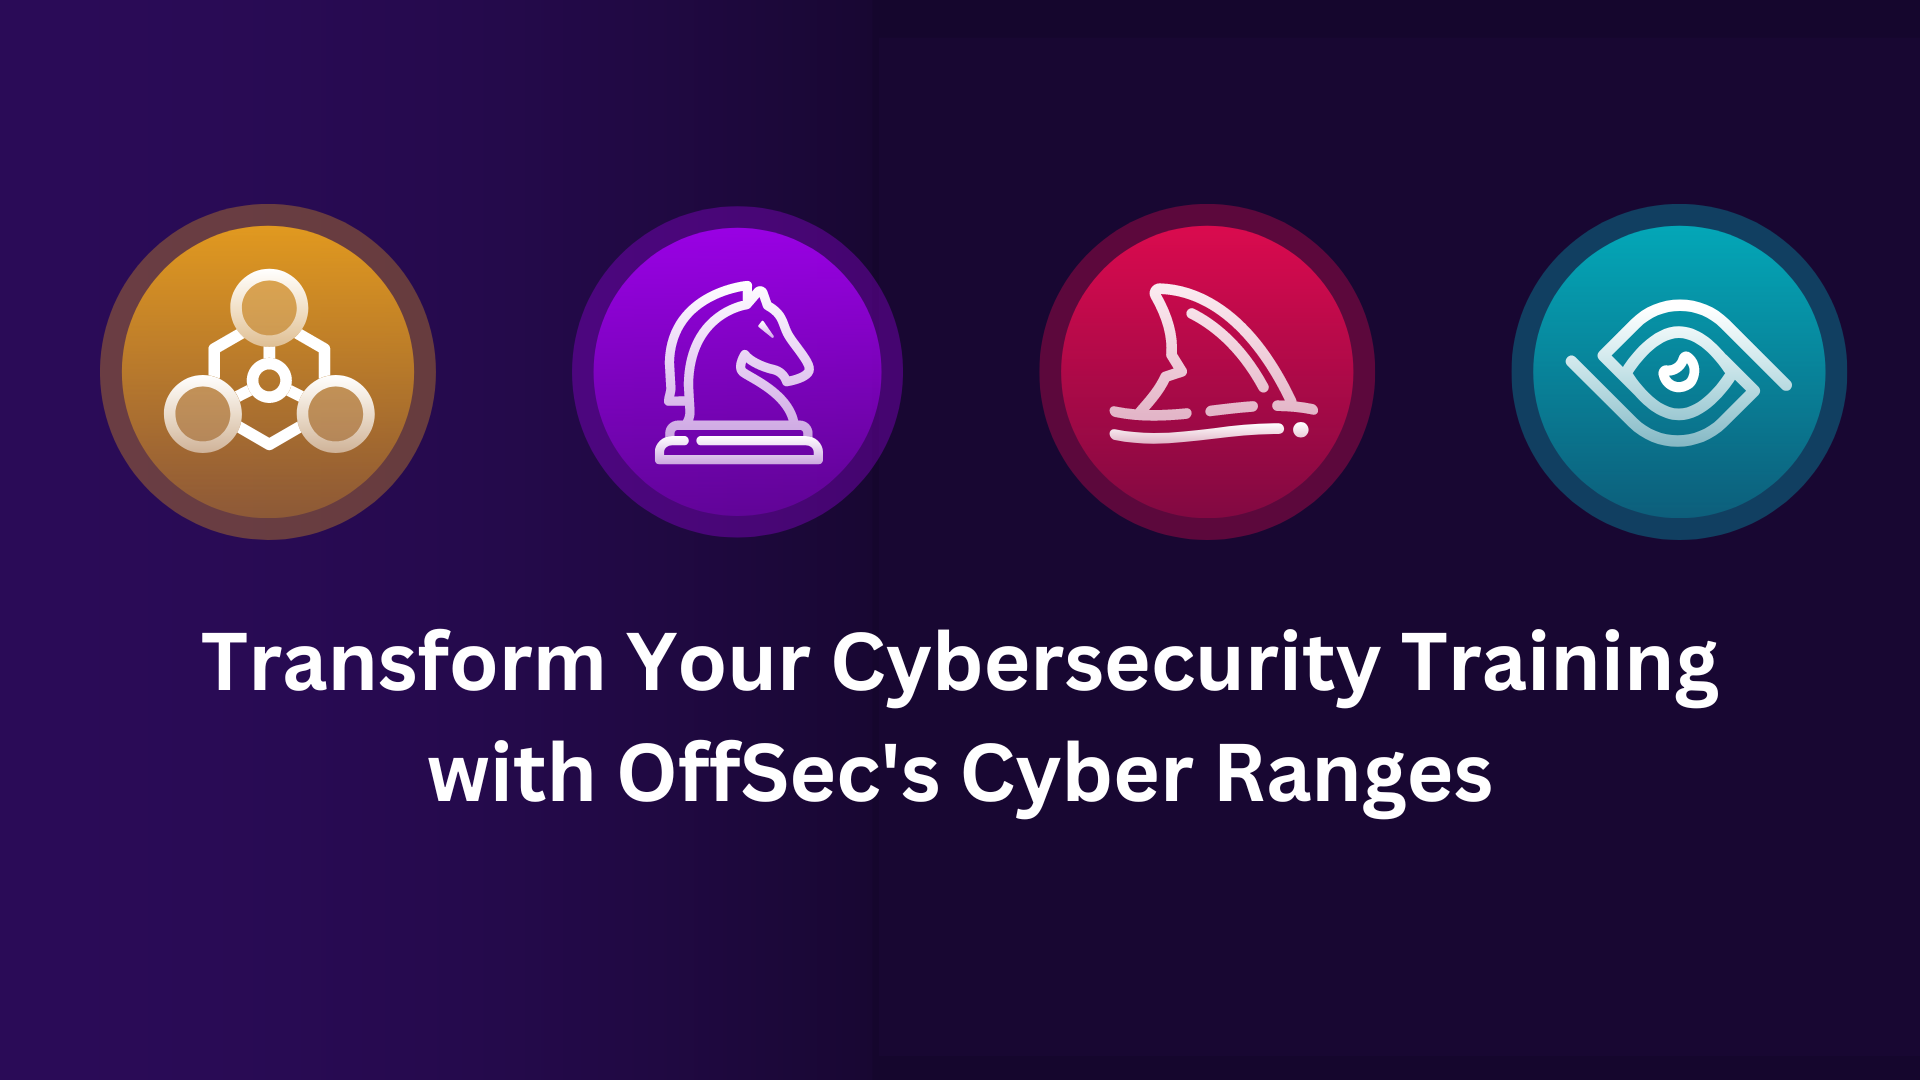 Transform Your Cybersecurity Training with OffSec’s Cyber Ranges